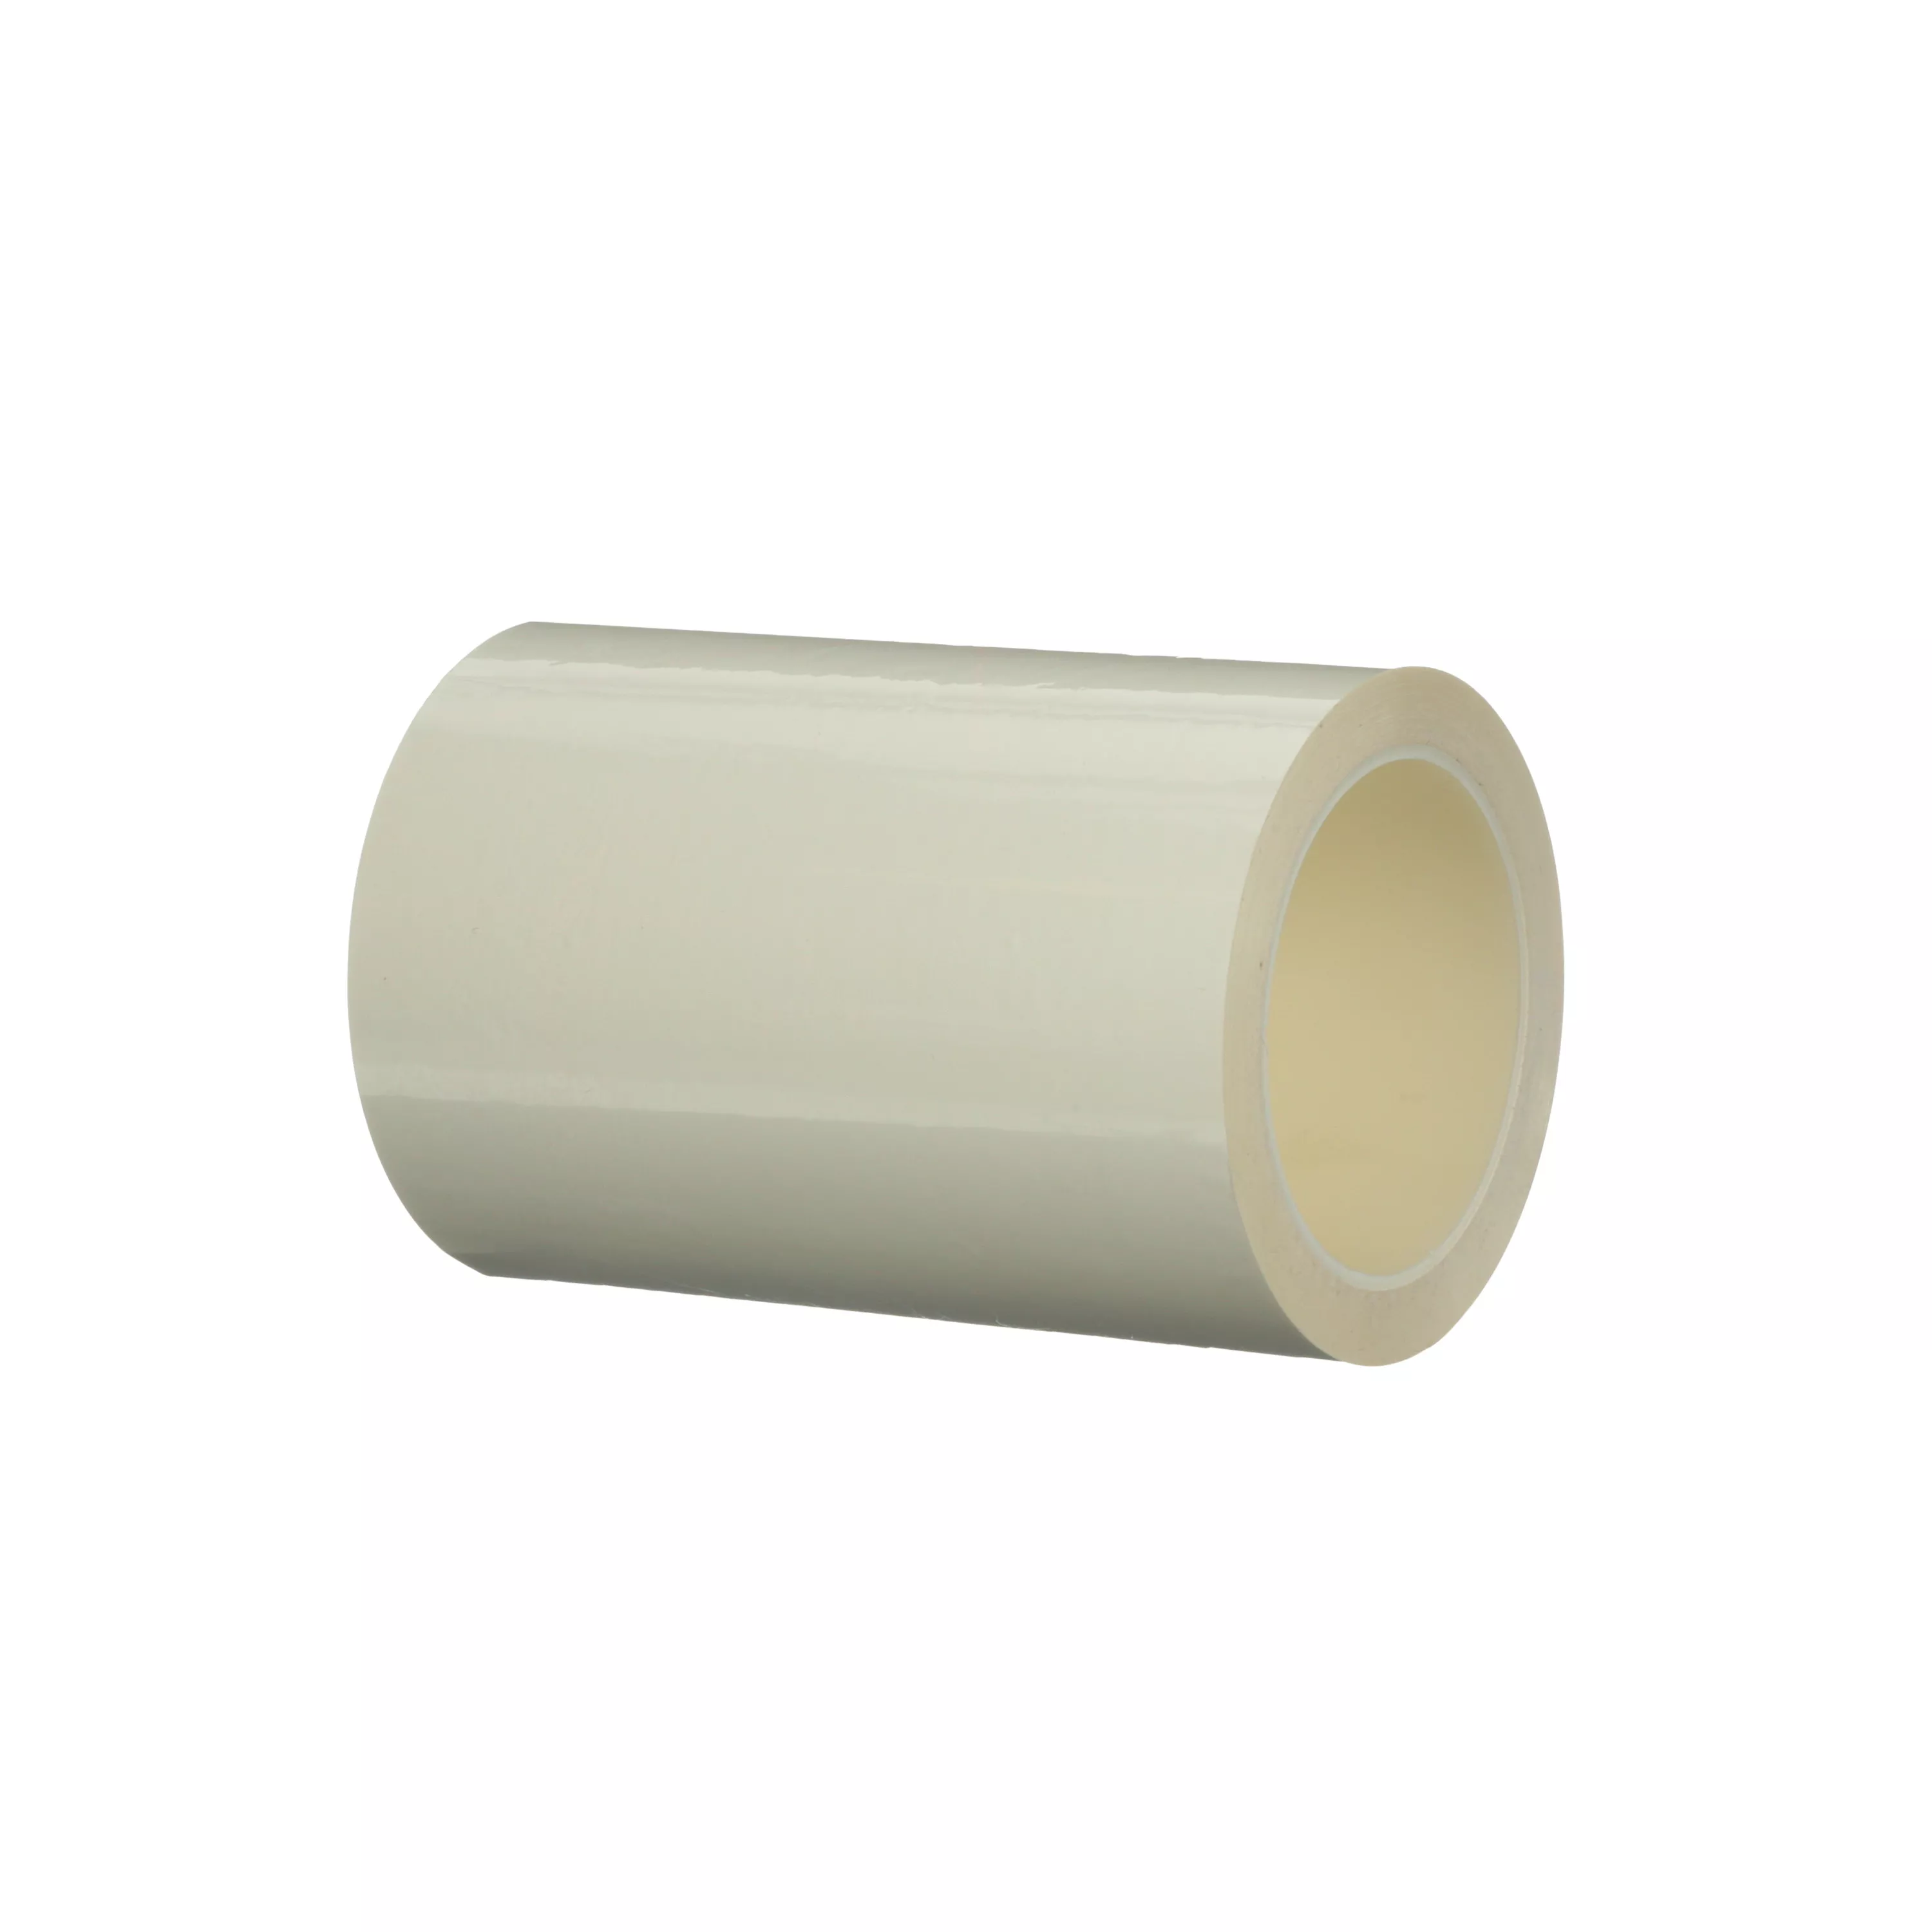 3M™ Polyester Film Tape 850, White, 6 in x 72 yd, 1.9 mil, 8 Roll/Case